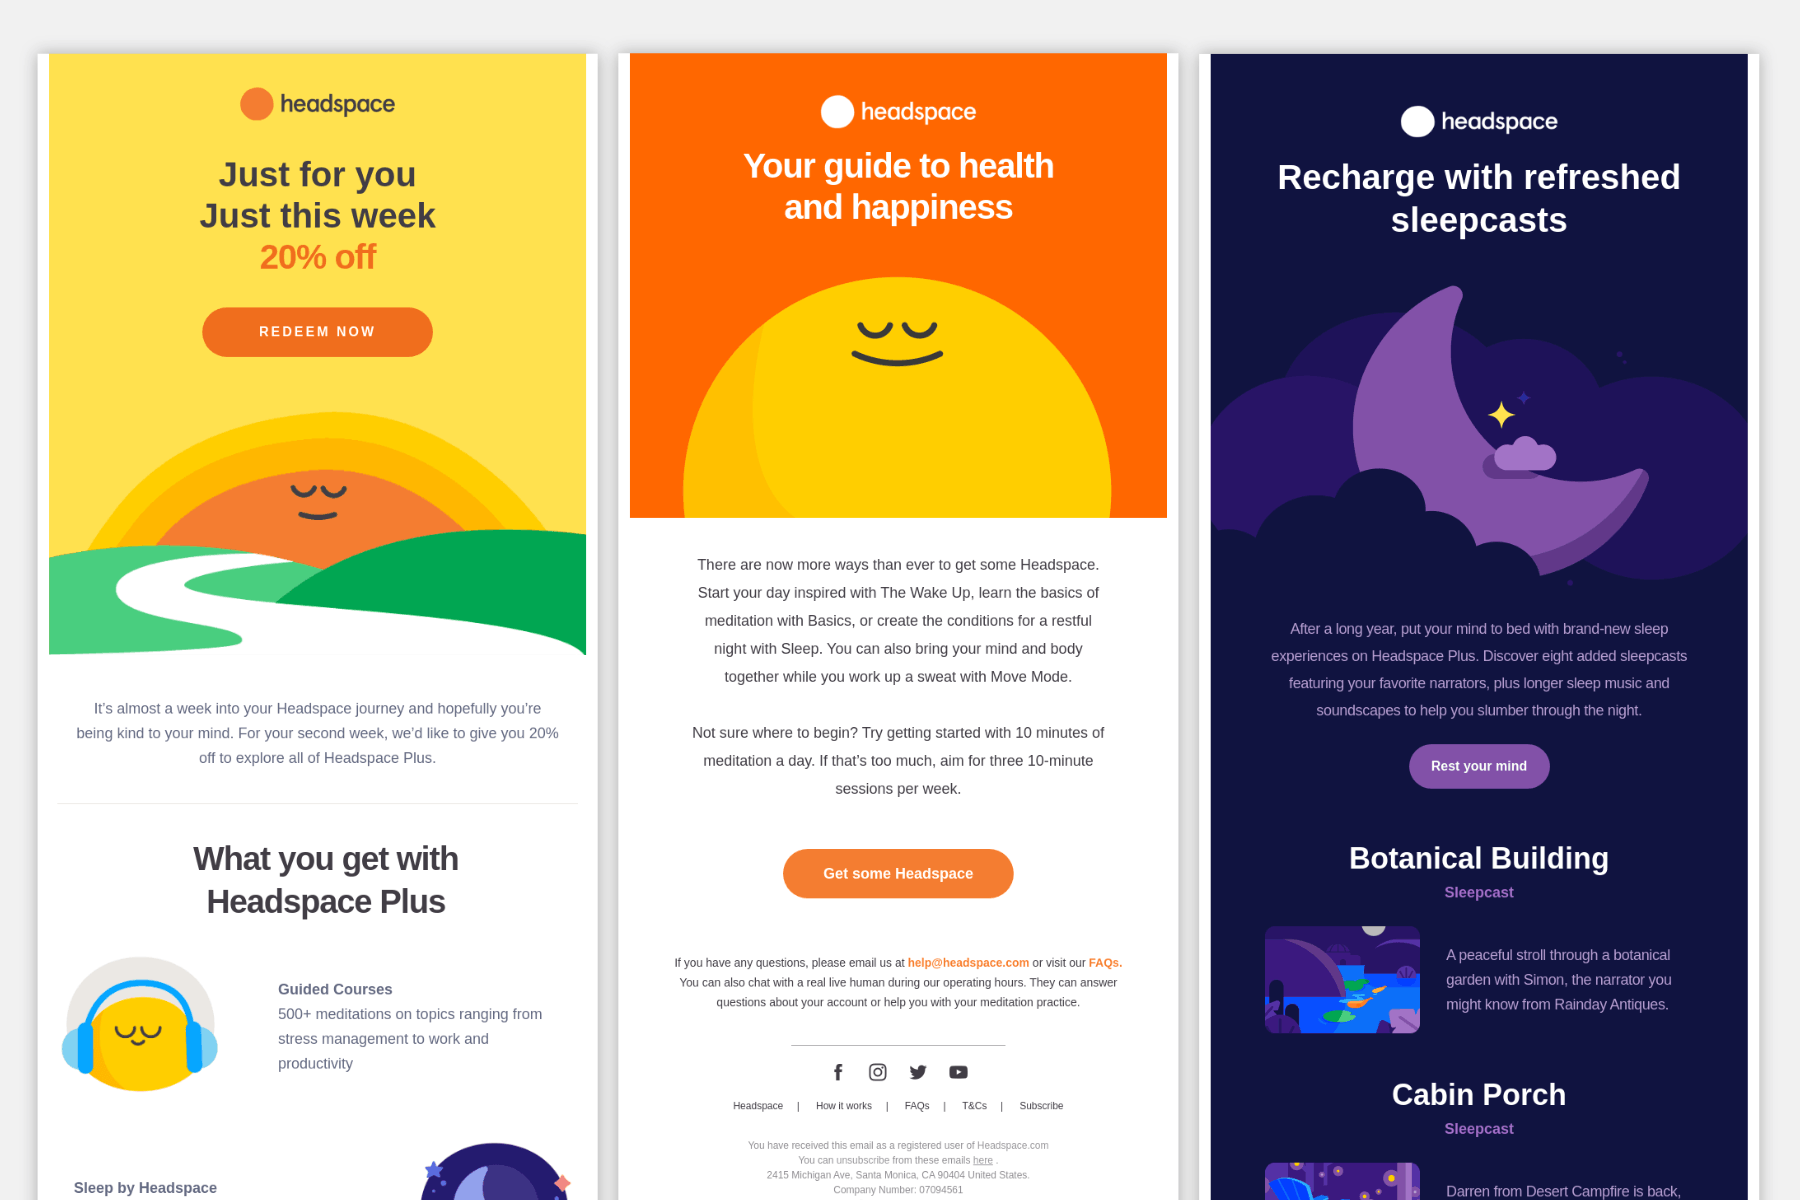 Three email examples from Headspace, each having different illustrations and colors that match them.